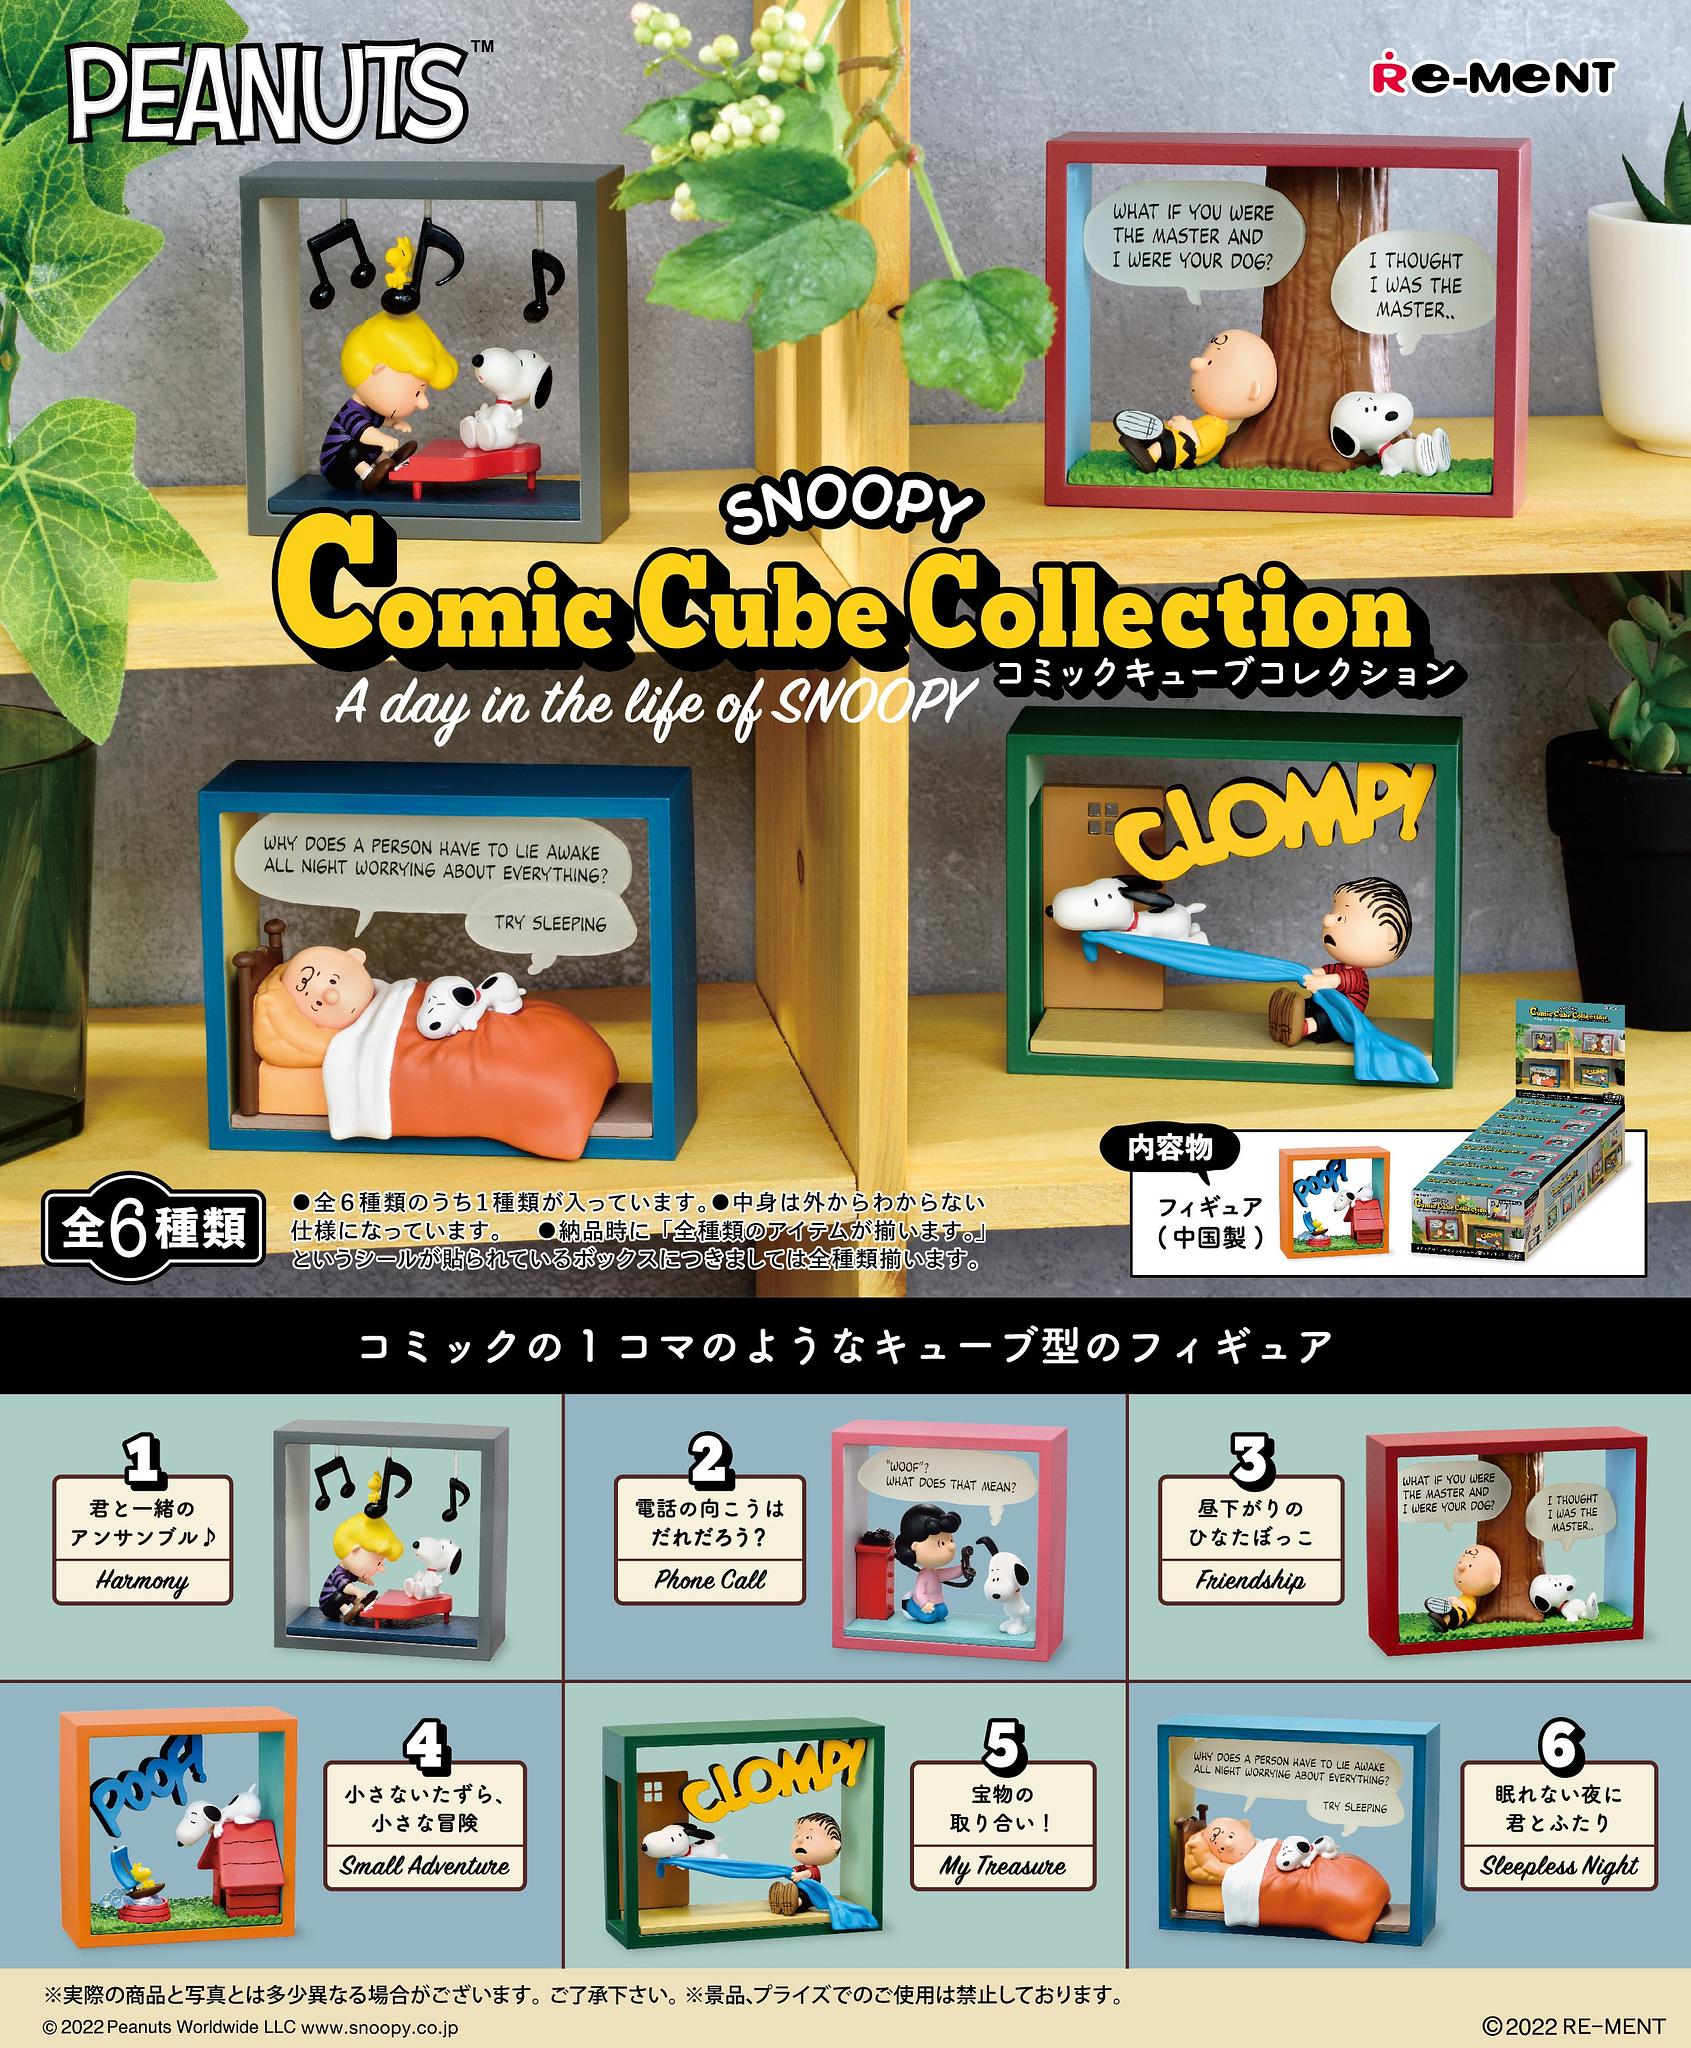 Peanuts - SNOOPY Comic Cube Collection